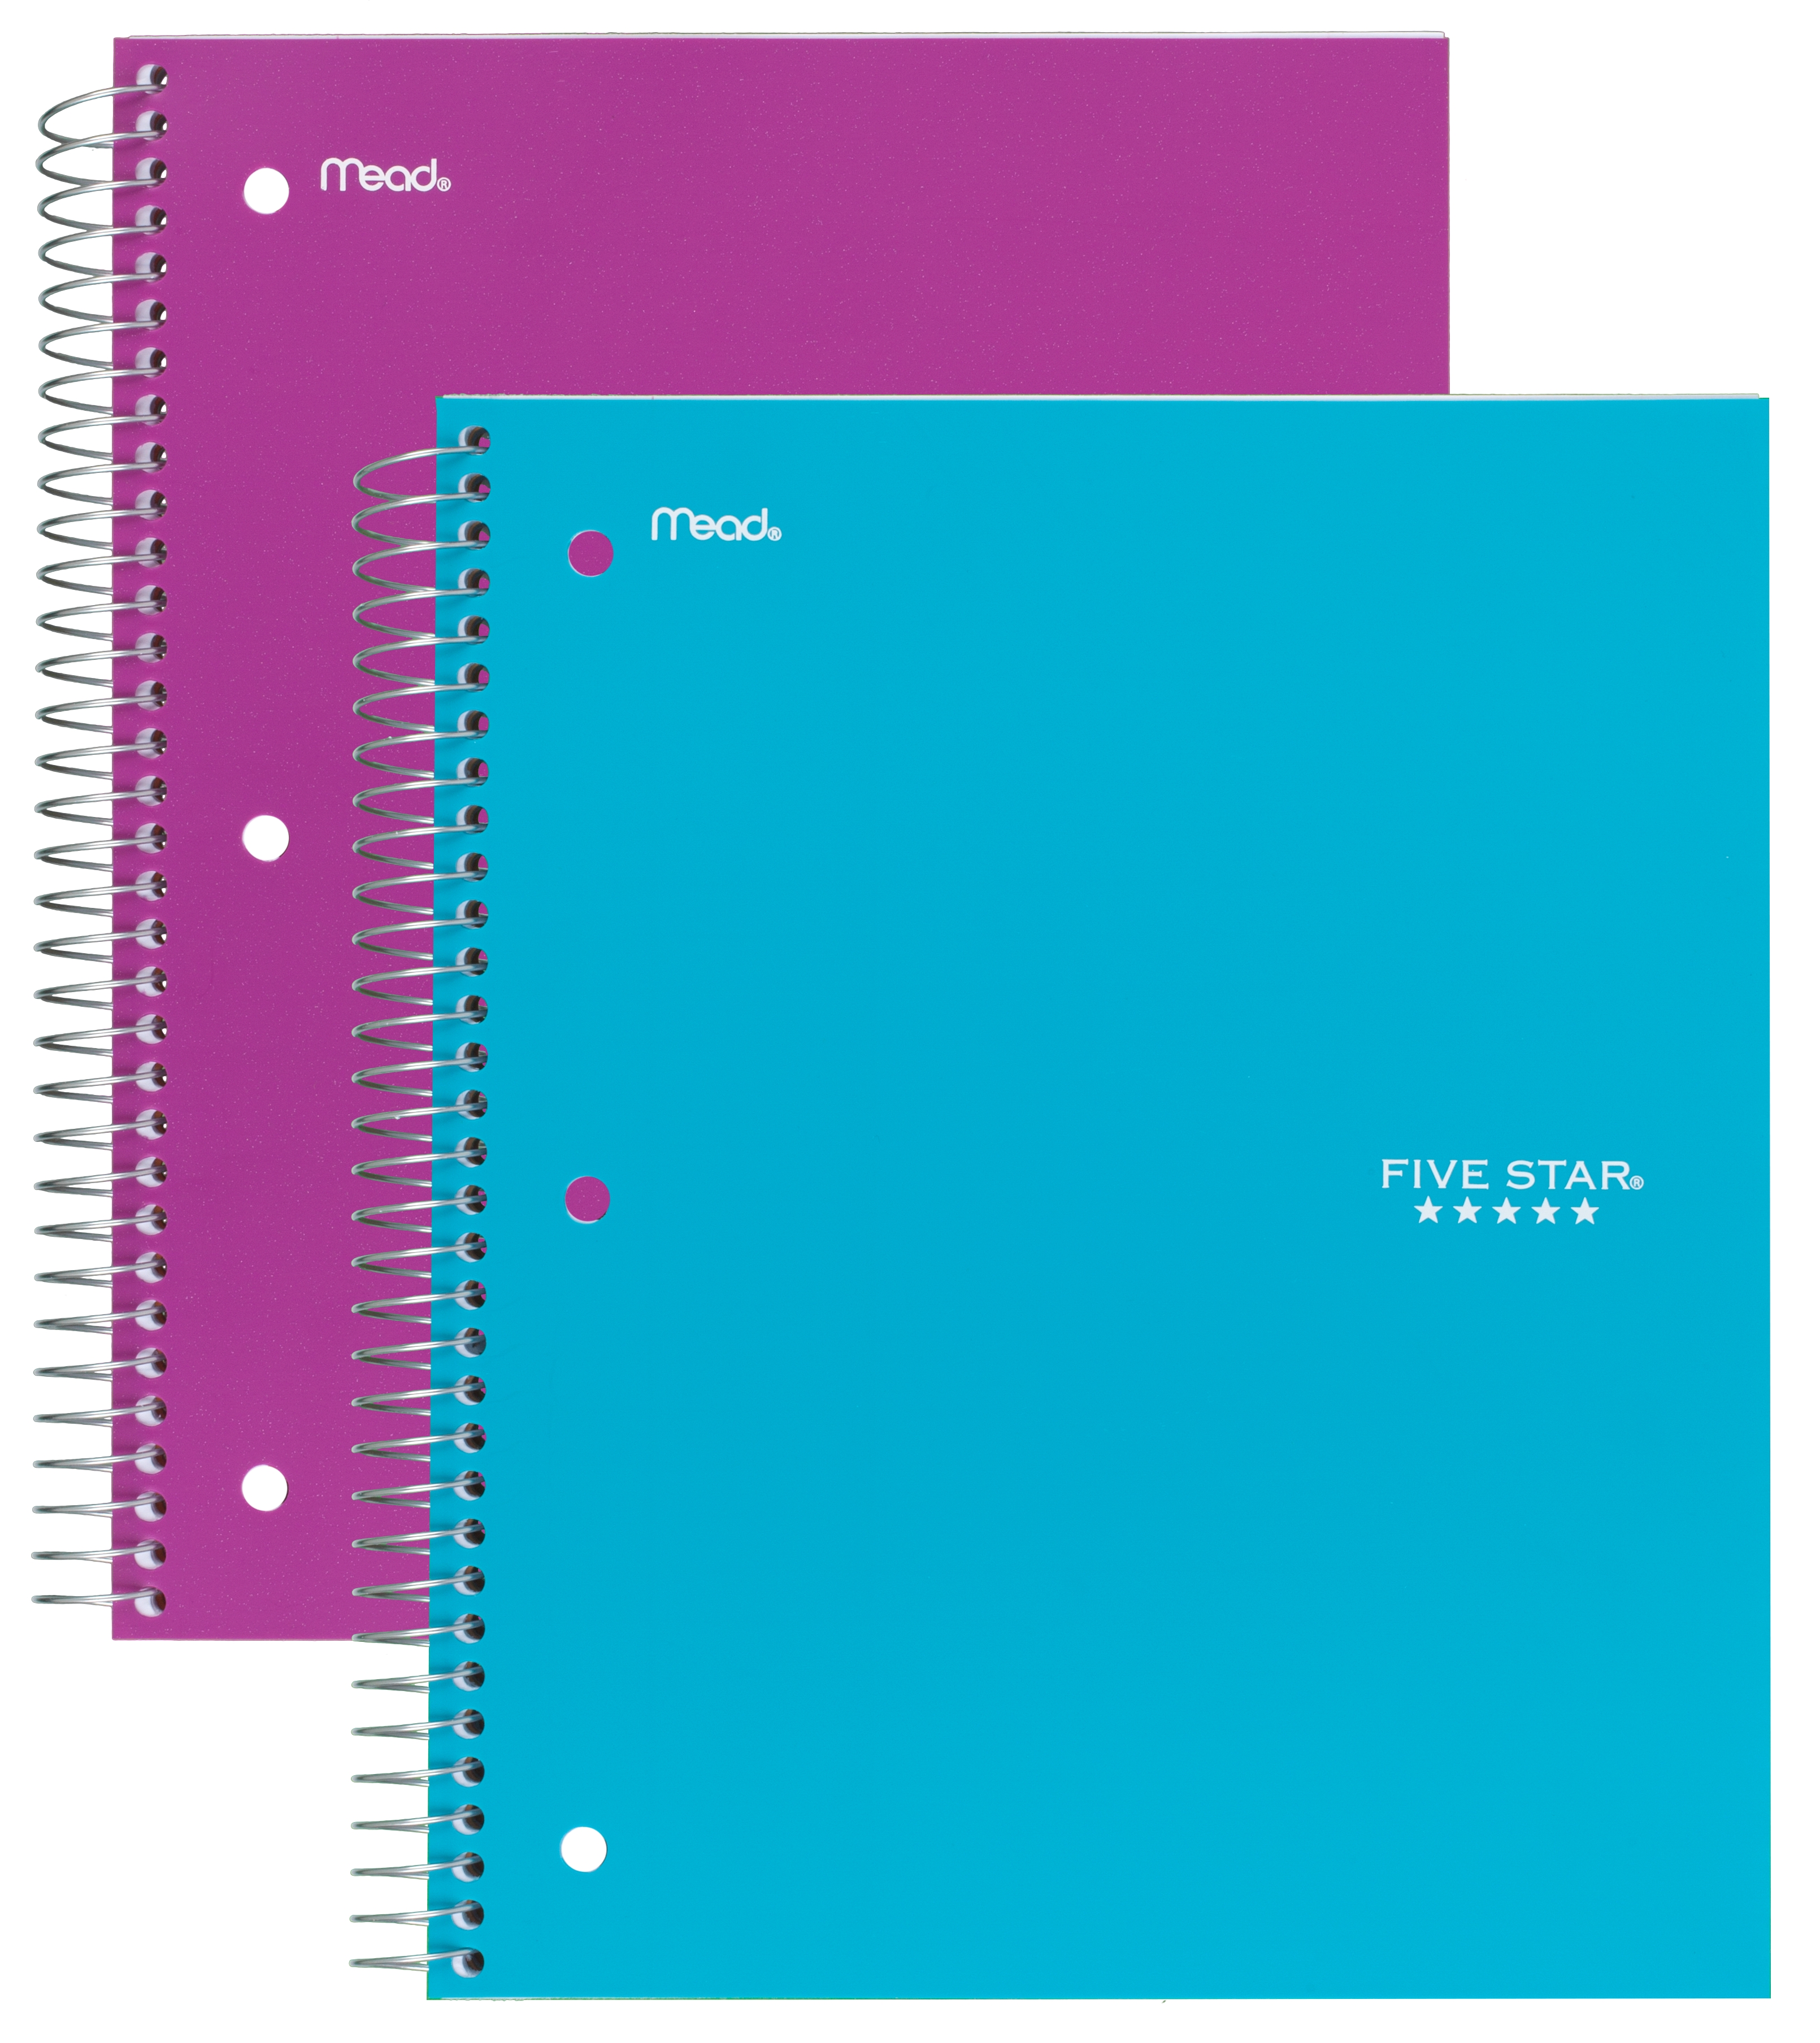 Mead Five Star Notebook ,3 Subject  College Ruled 150 Sheets, 1 Notebook